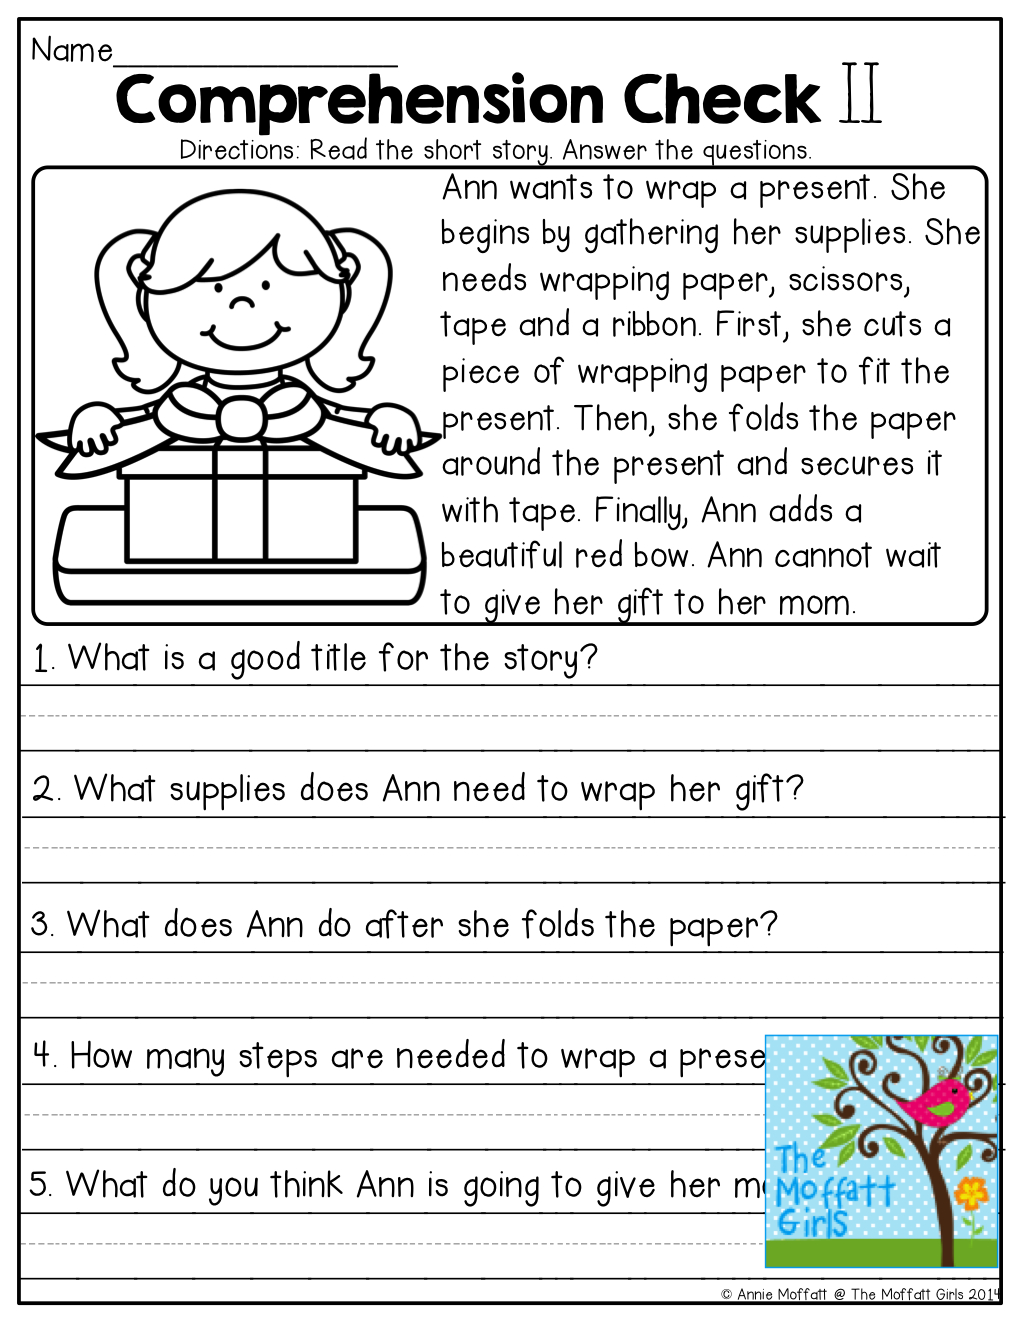 Free Printable Short Stories With Comprehension Questions | Free Printable